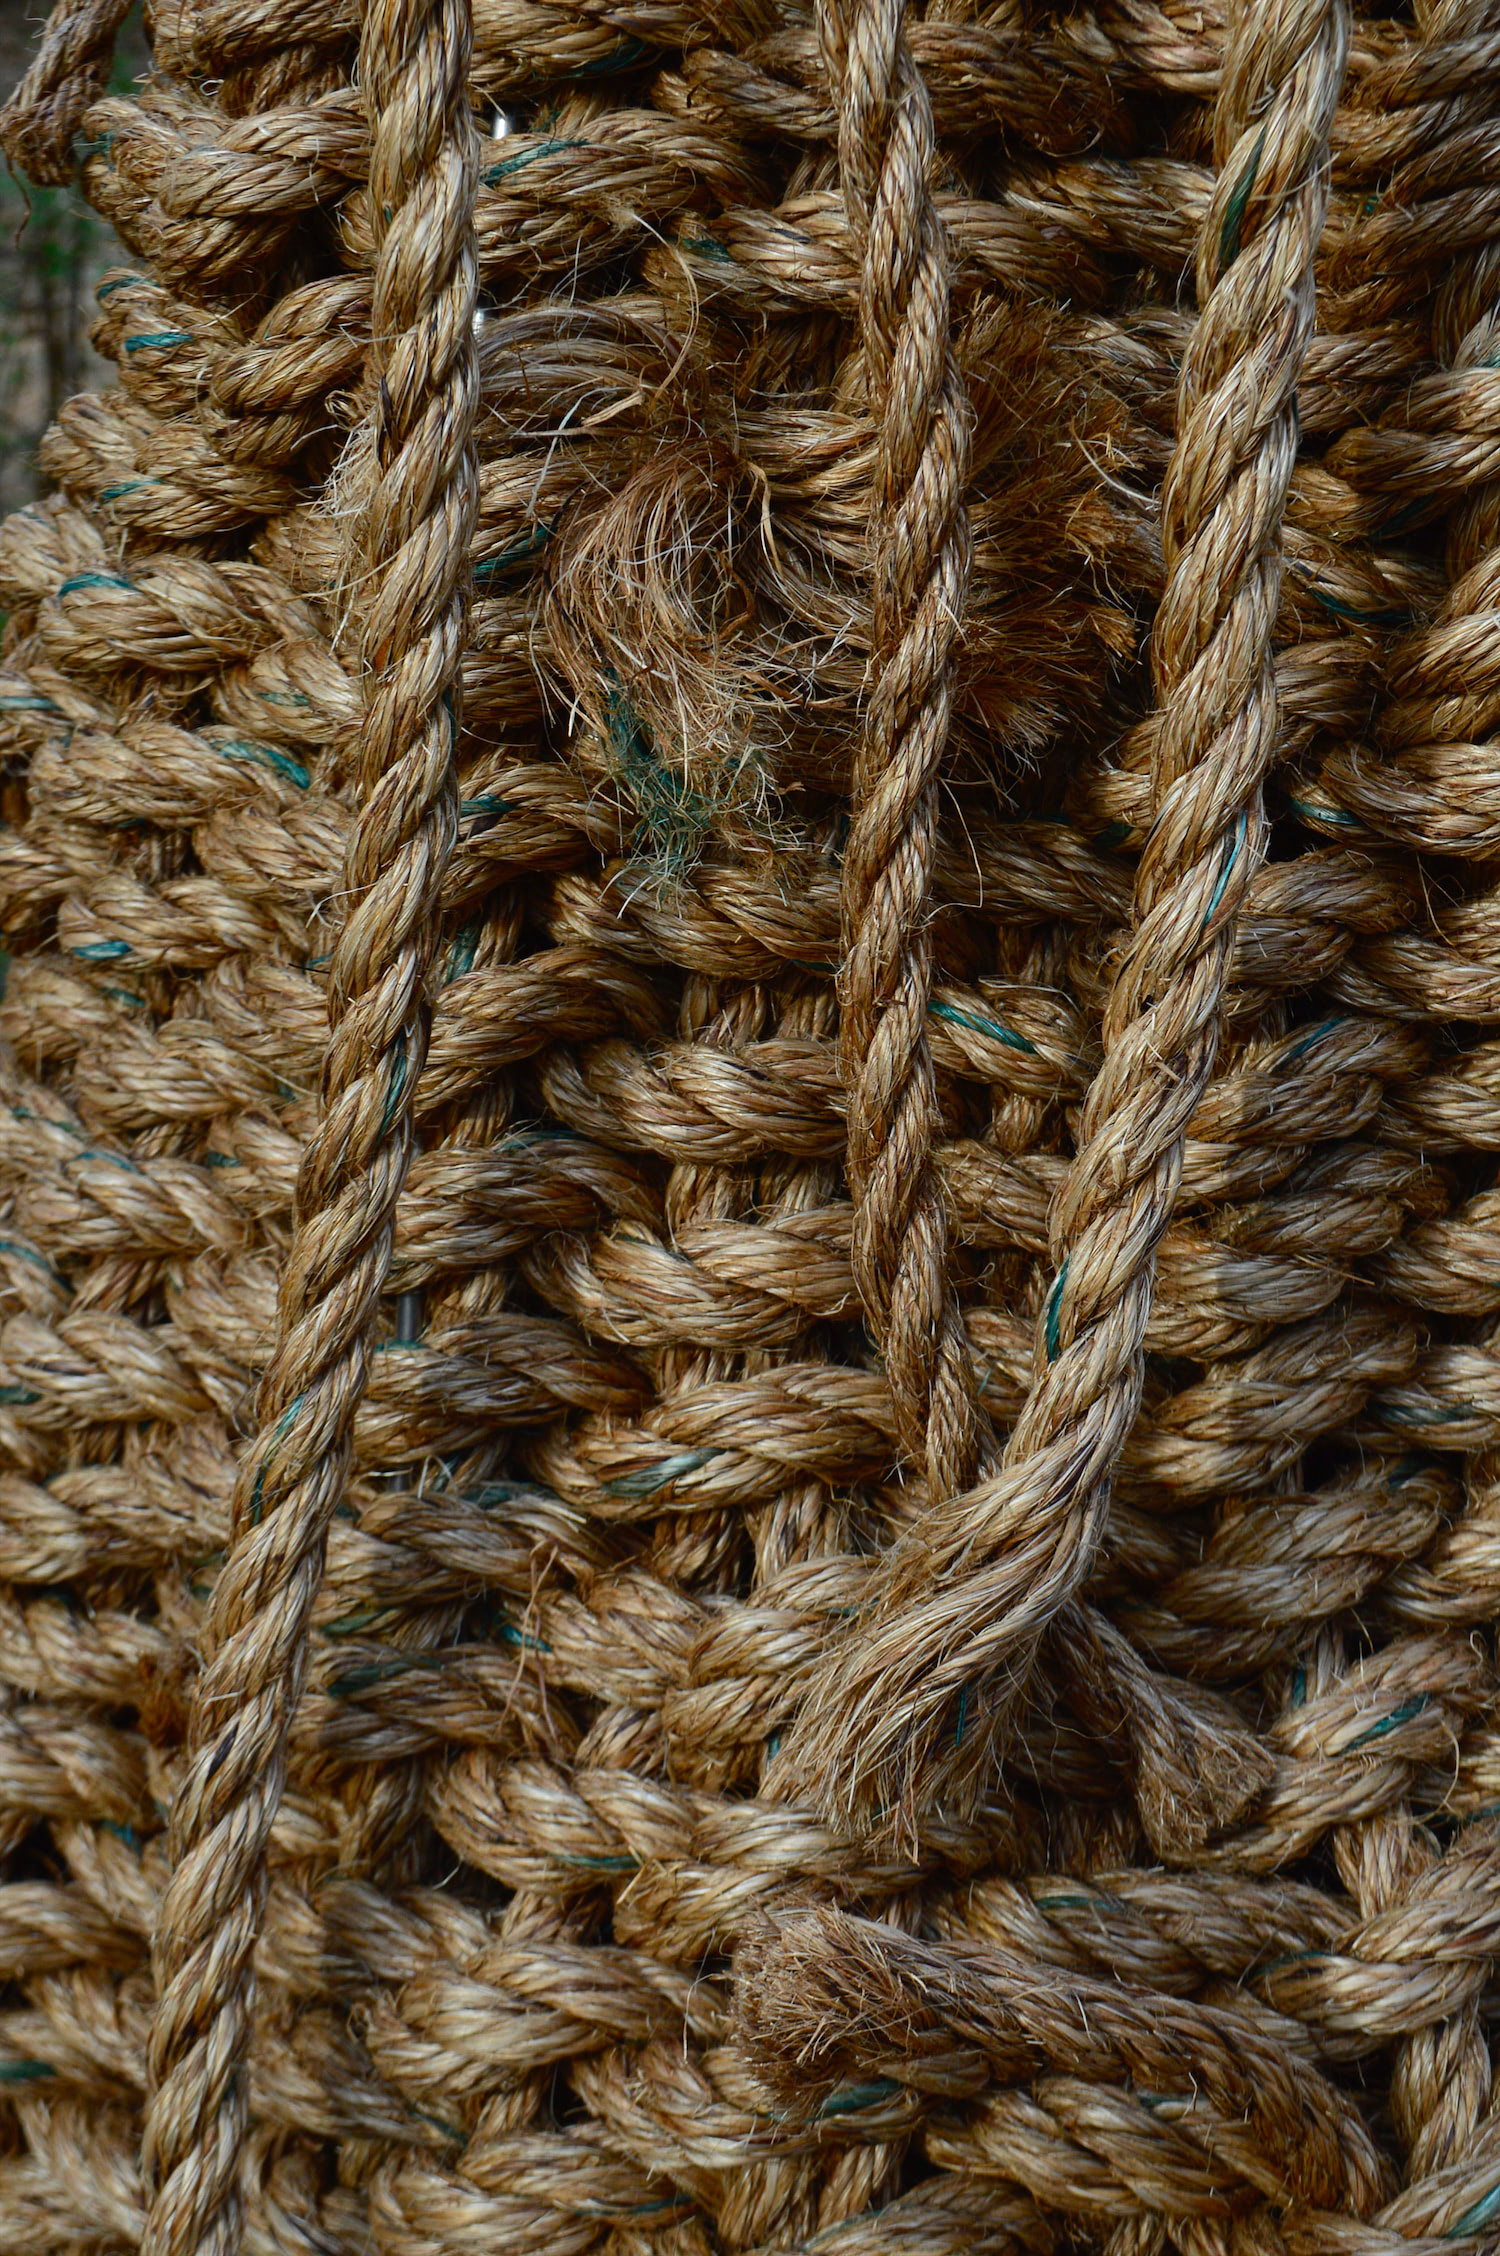 This detail shot captures the outer facade of the basket from mid-height. The directionality of the horizontal weavers, which are slightly angled upwards and to the right, are emphasized. One of the weavers, which is replaced by an additional rope segment, is untucked, resulting in the visibility of its protruding, frayed edge. Three hanging warps hug the surface of the sculpture. The two on the right hand-side cross near their edges.